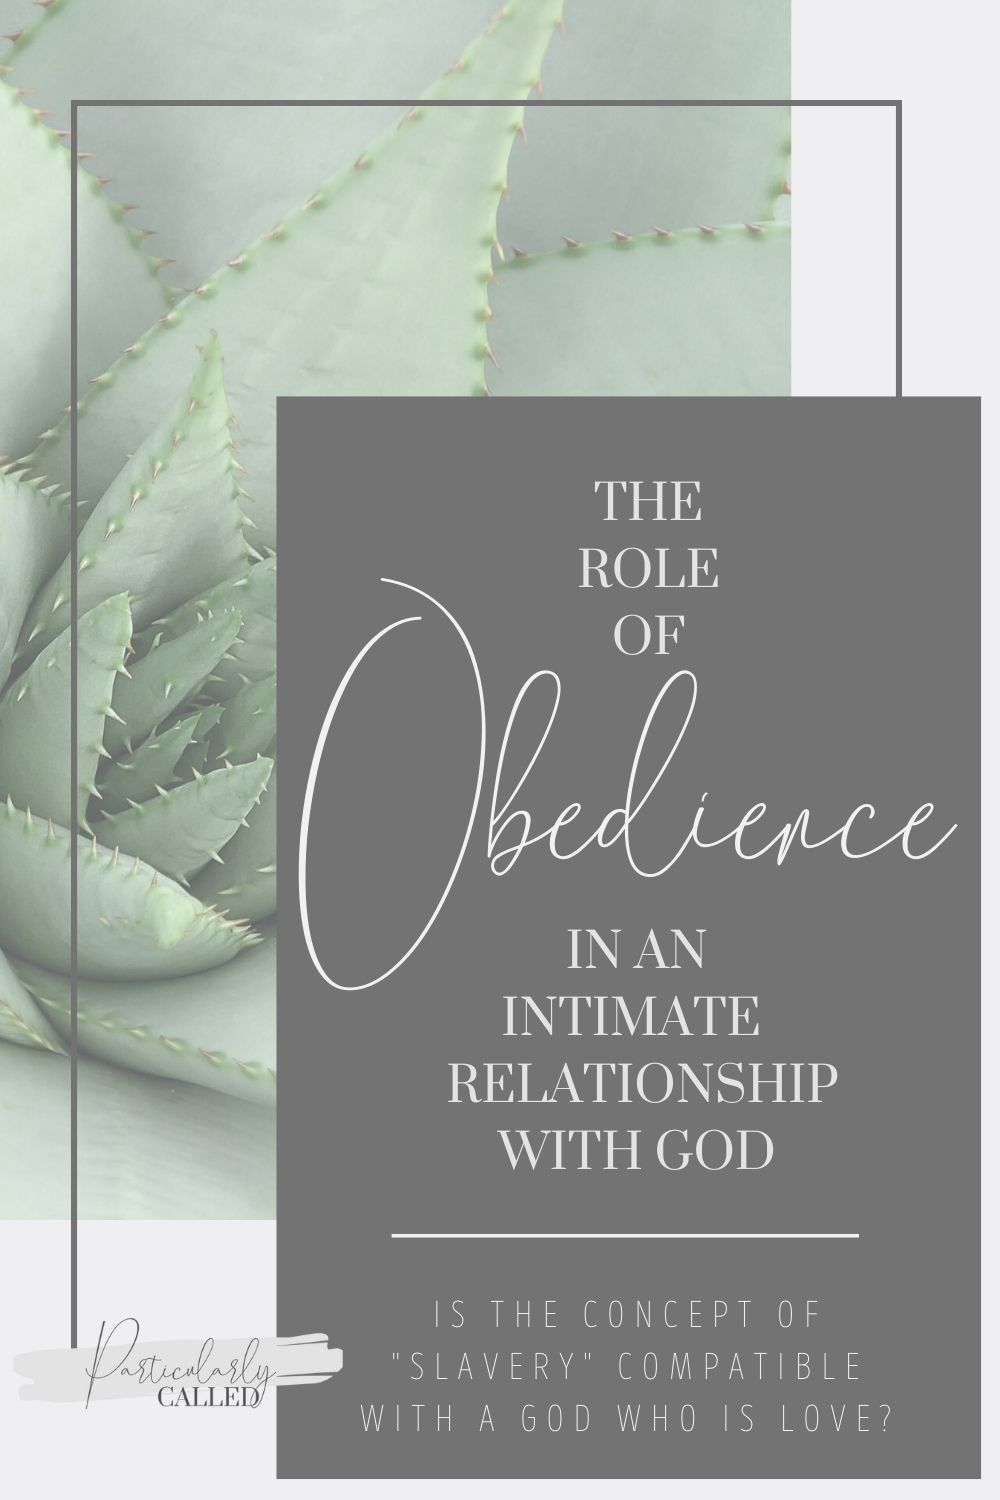 Is Obedience Compatible with a God who is “Love”?